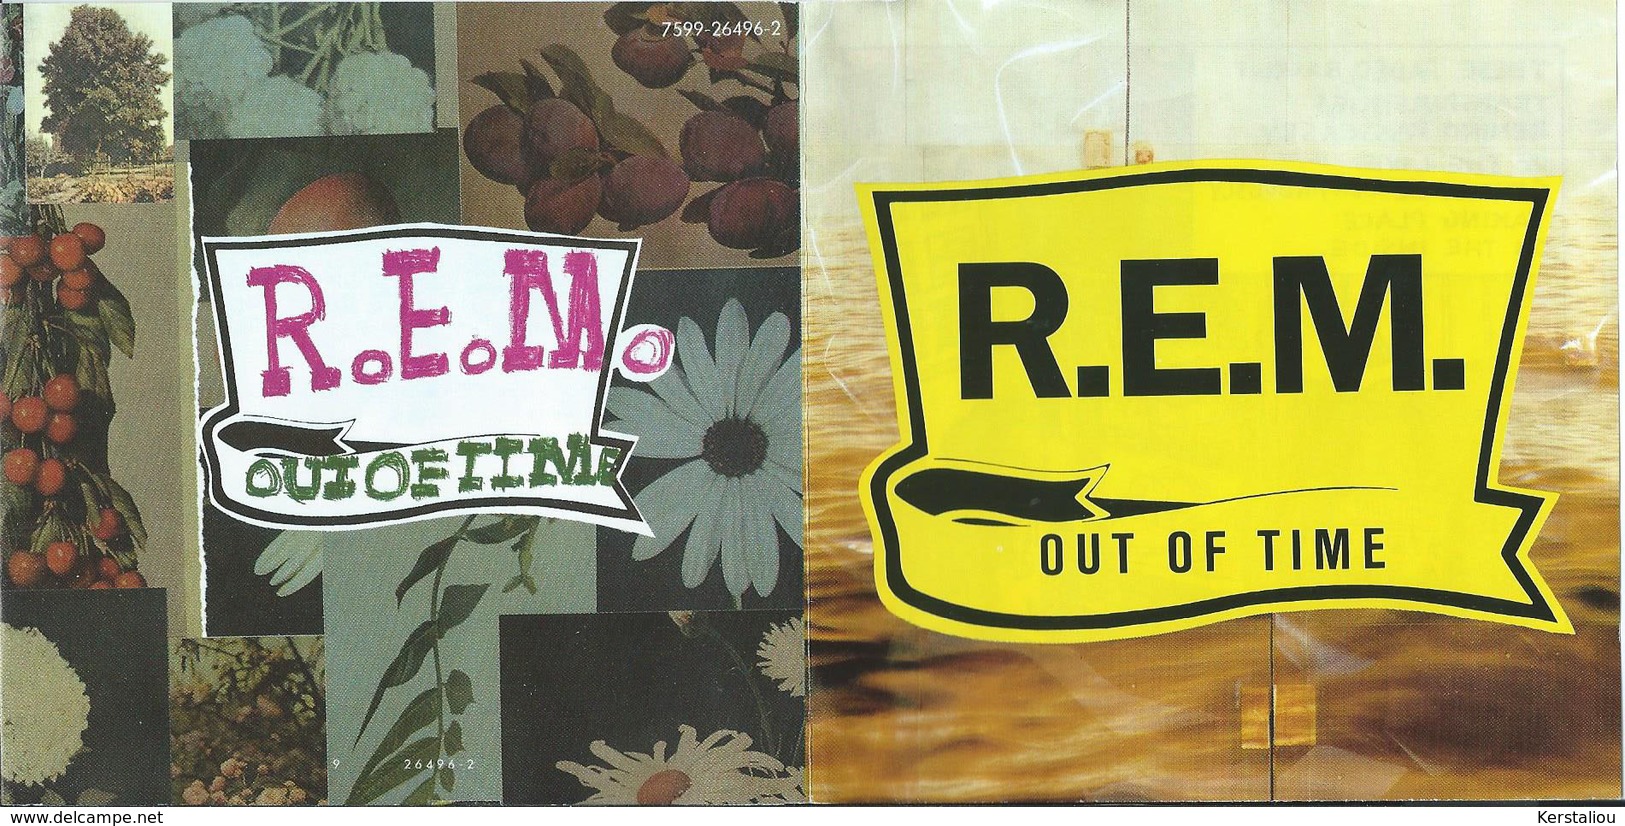 R.E.M. – "Out of time" & "Singles Collected" – 2 CD – 1991 & 1994 – Warner Bros & IRS Records – Made in Germany & USA.